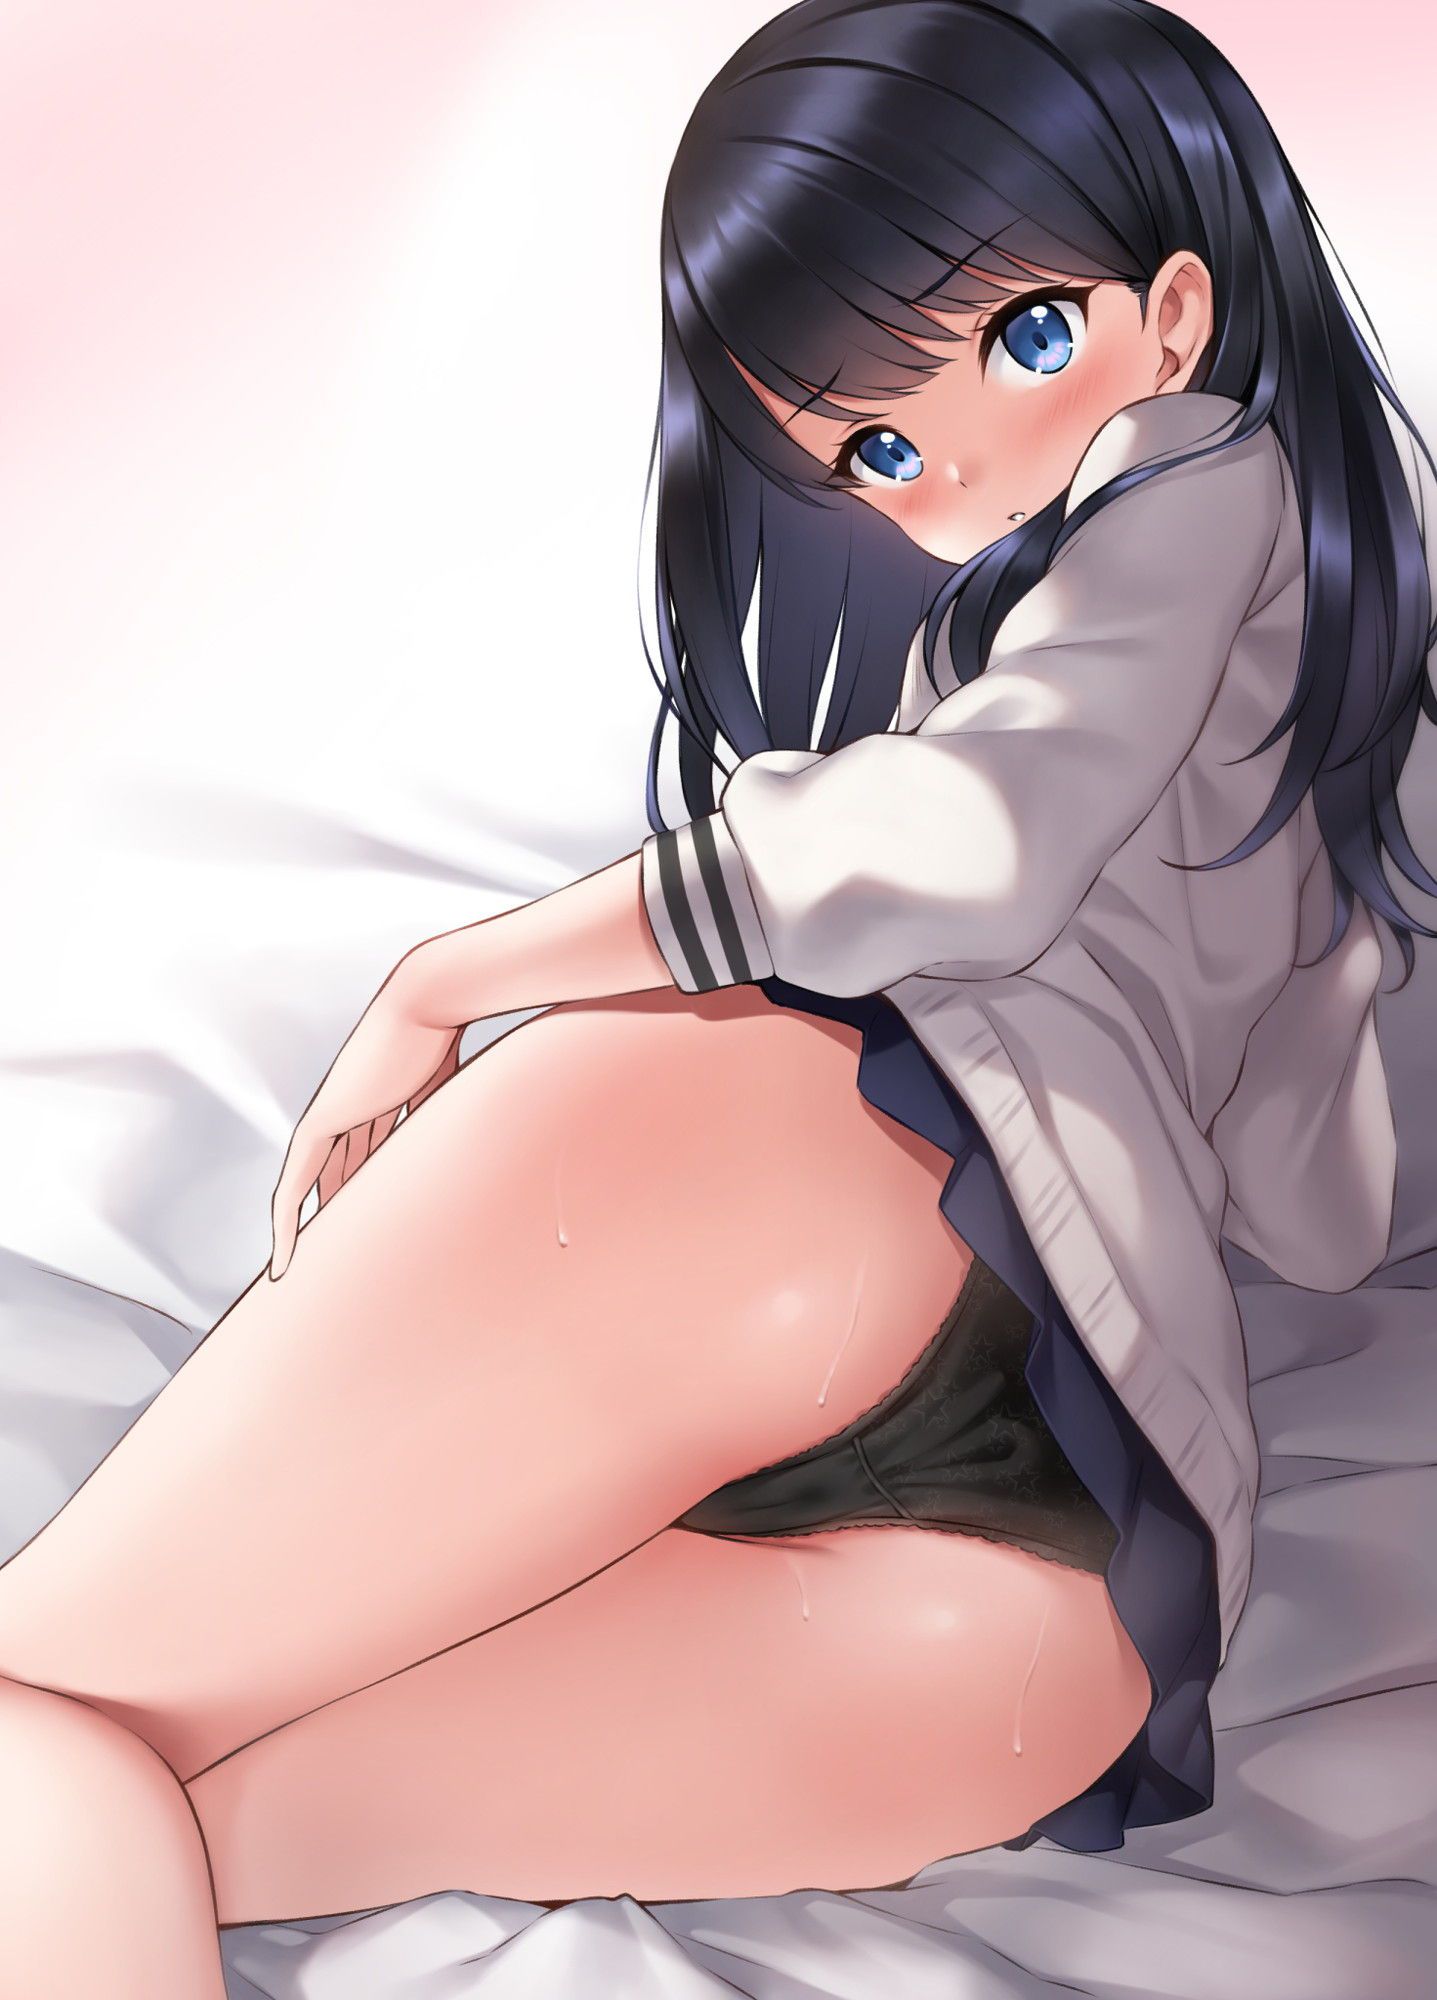 SSSS. Gather those who want to nudge with GRIDMAN's erotic images! 5